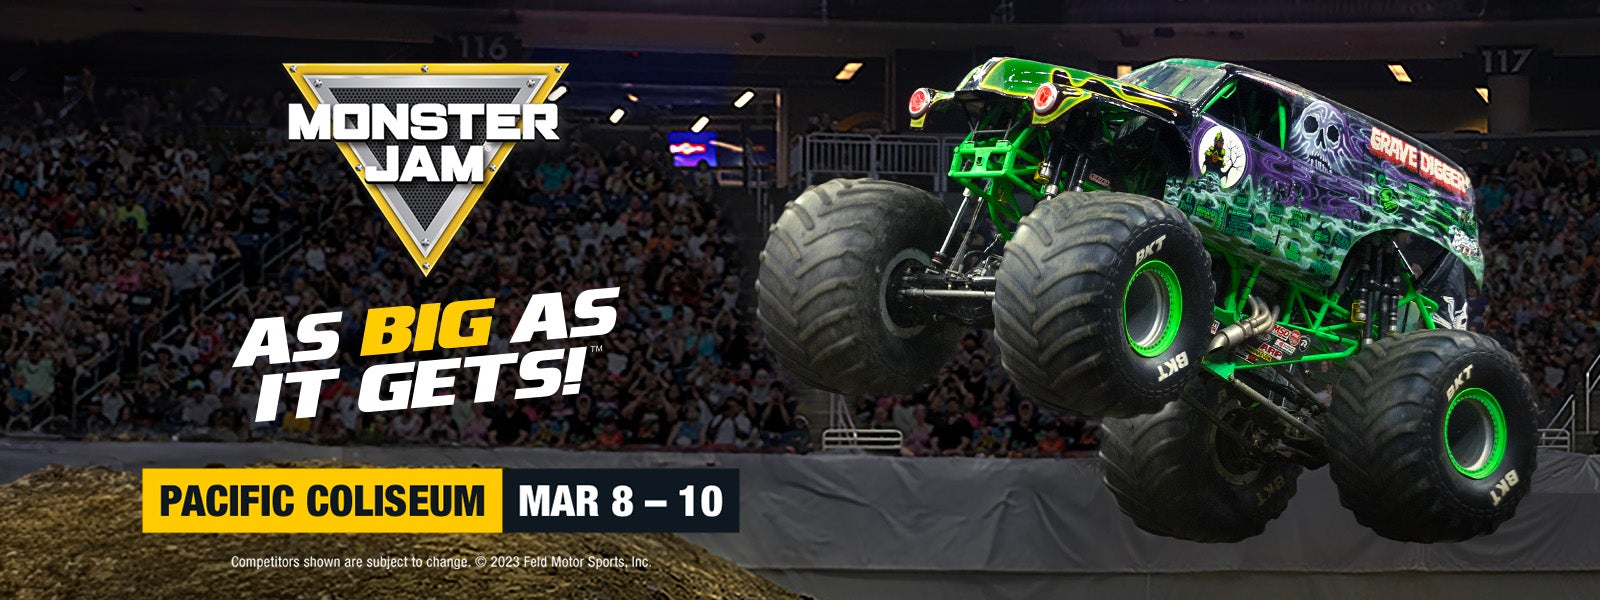 Monster Jam set to roar back into Vancouver - The Abbotsford News